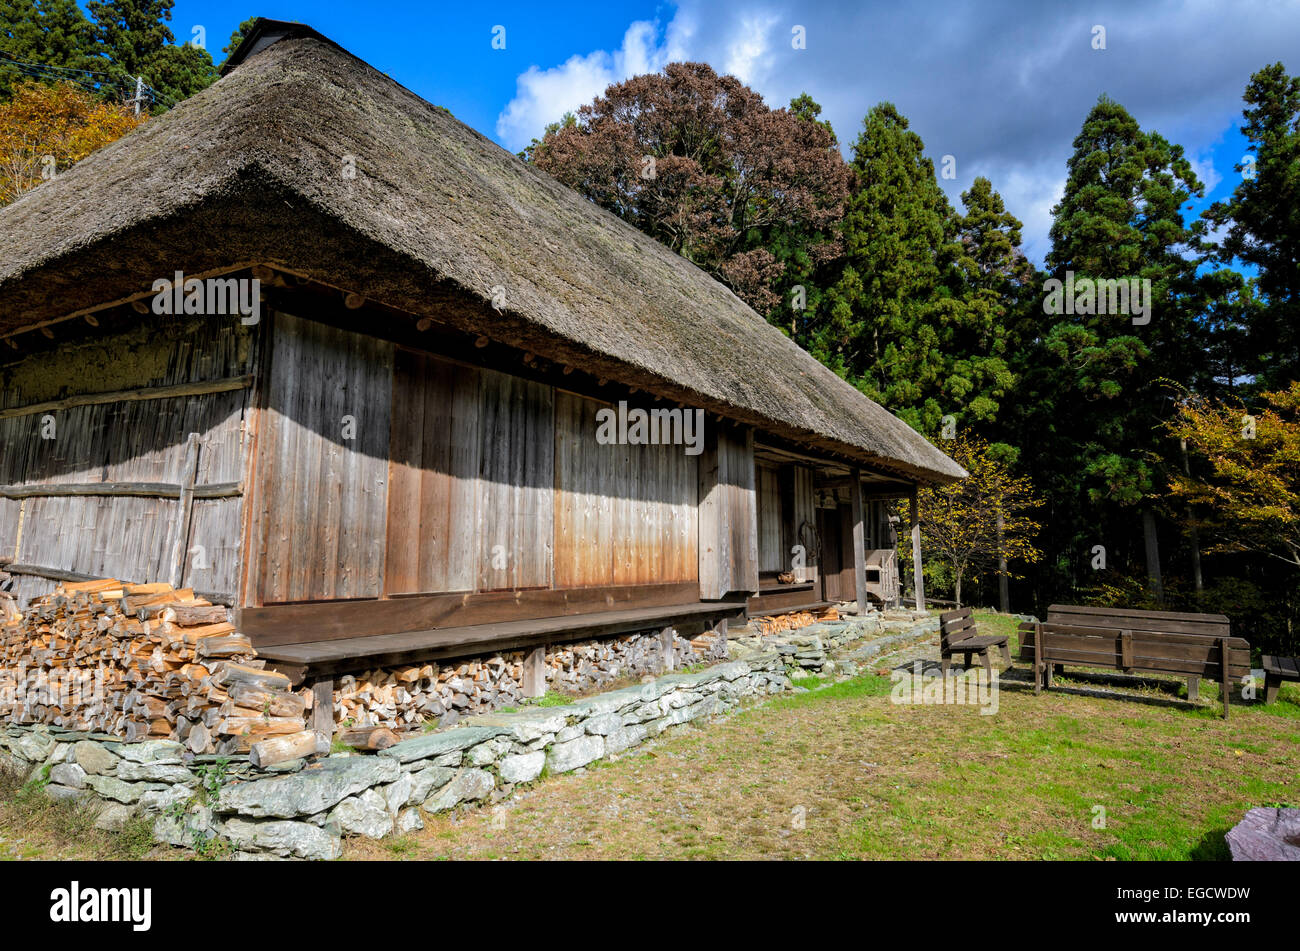 A minka, or old style wooden house, in Japan. Stock Photo